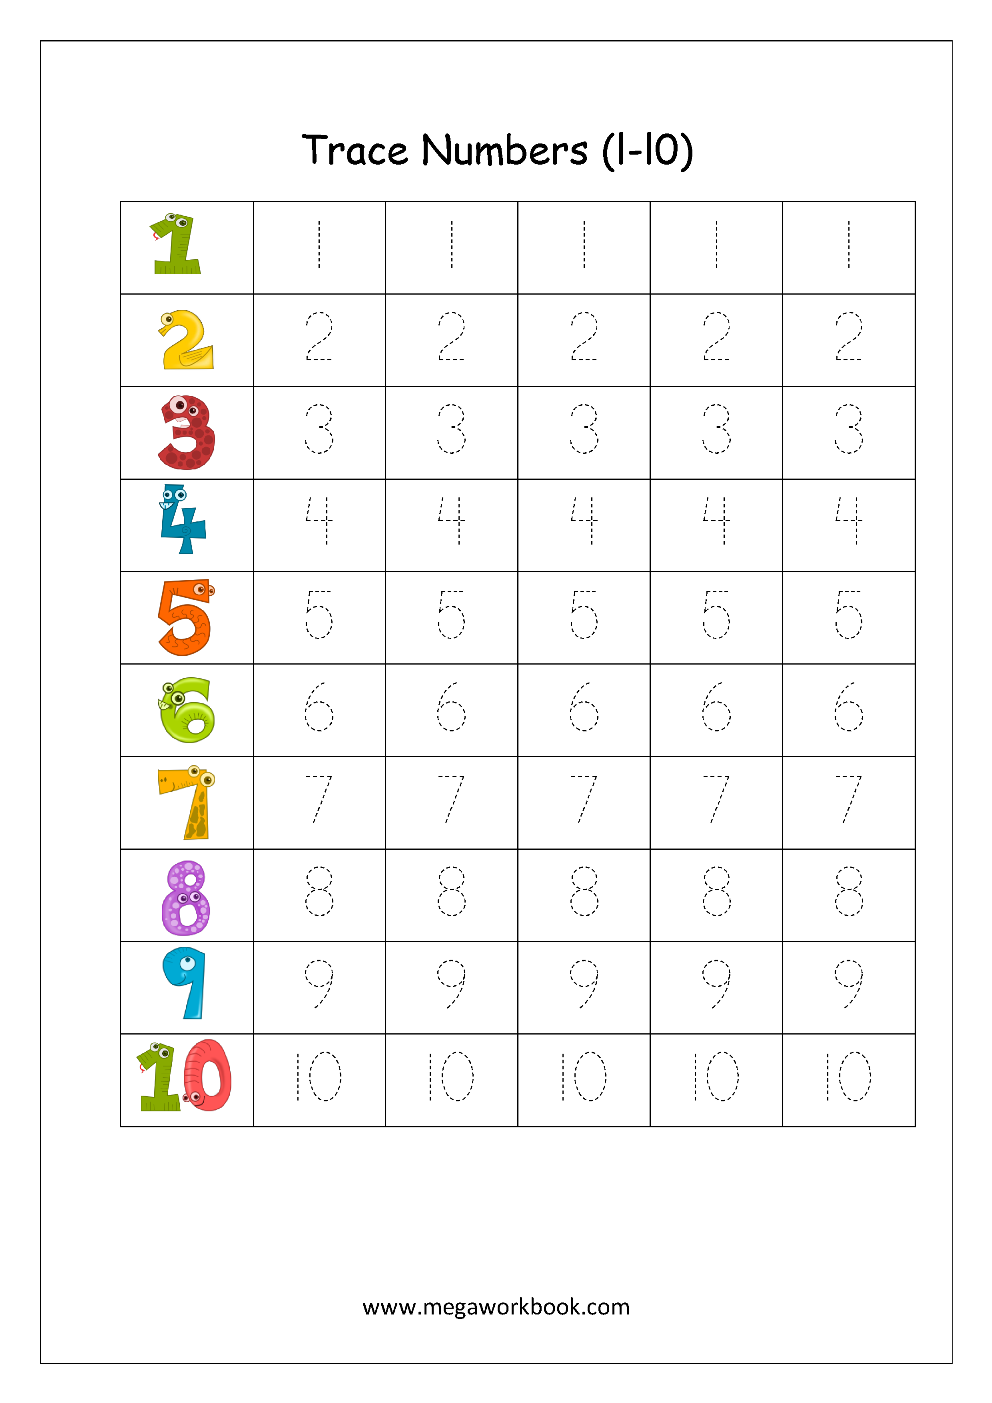 free-printable-worksheets-for-kids-dotted-numbers-to-trace-1-10-worksheets-number-tracing-1-10